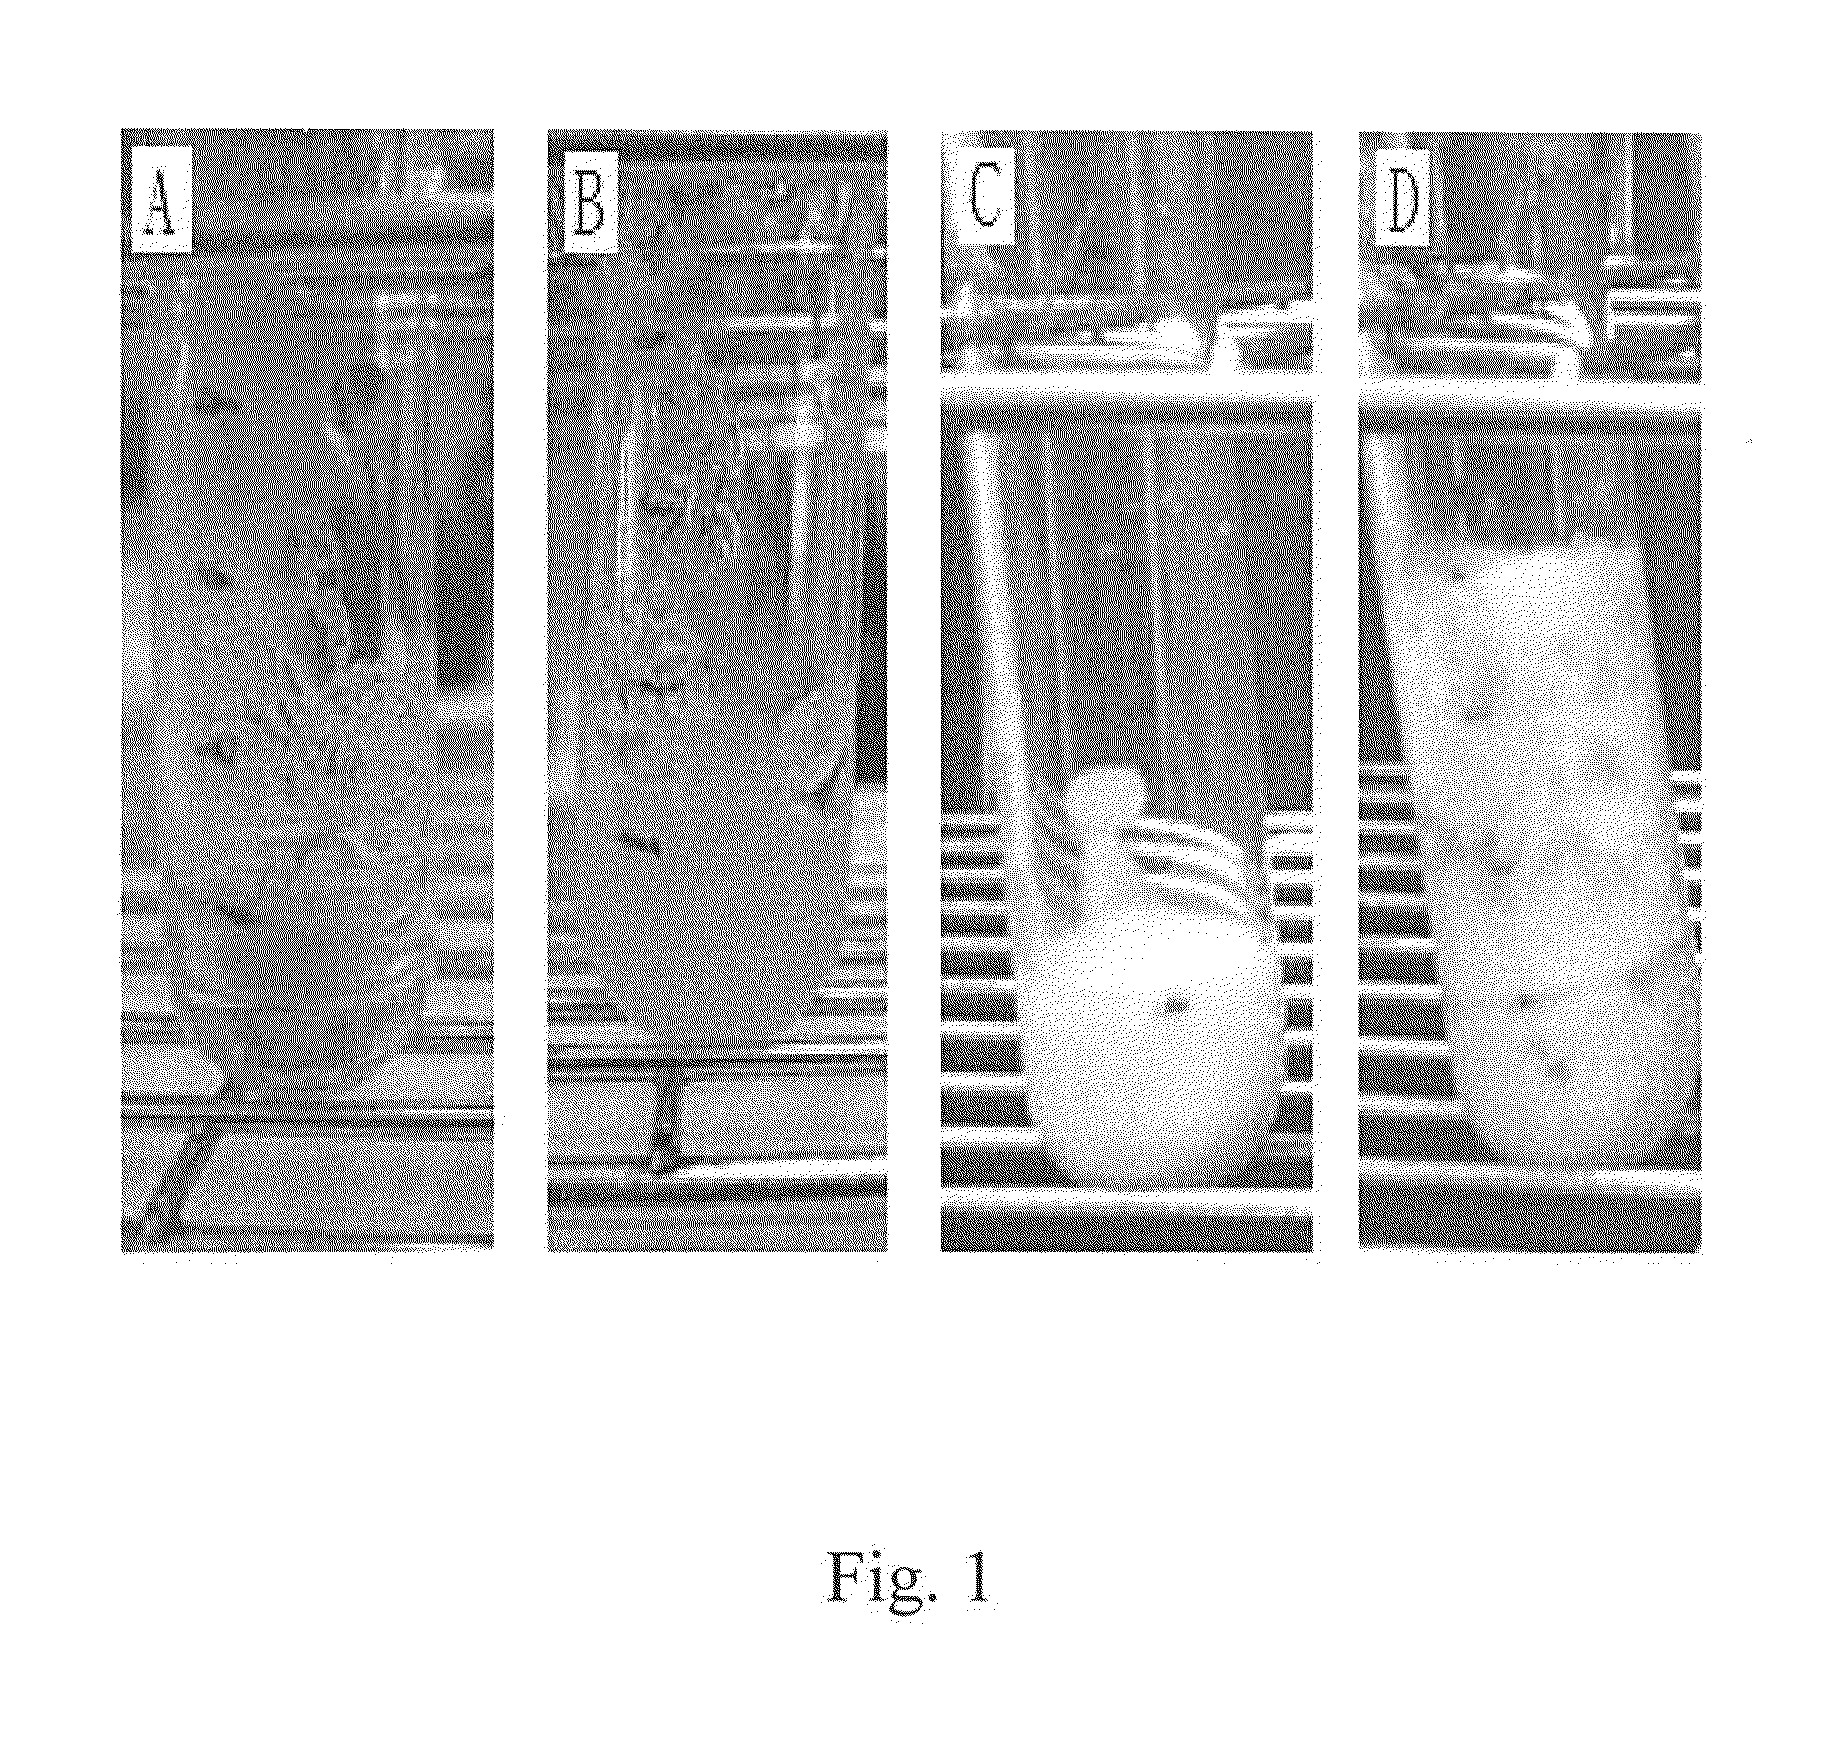 Process for producing inorganic interconnected 3D open cell bone substitutes